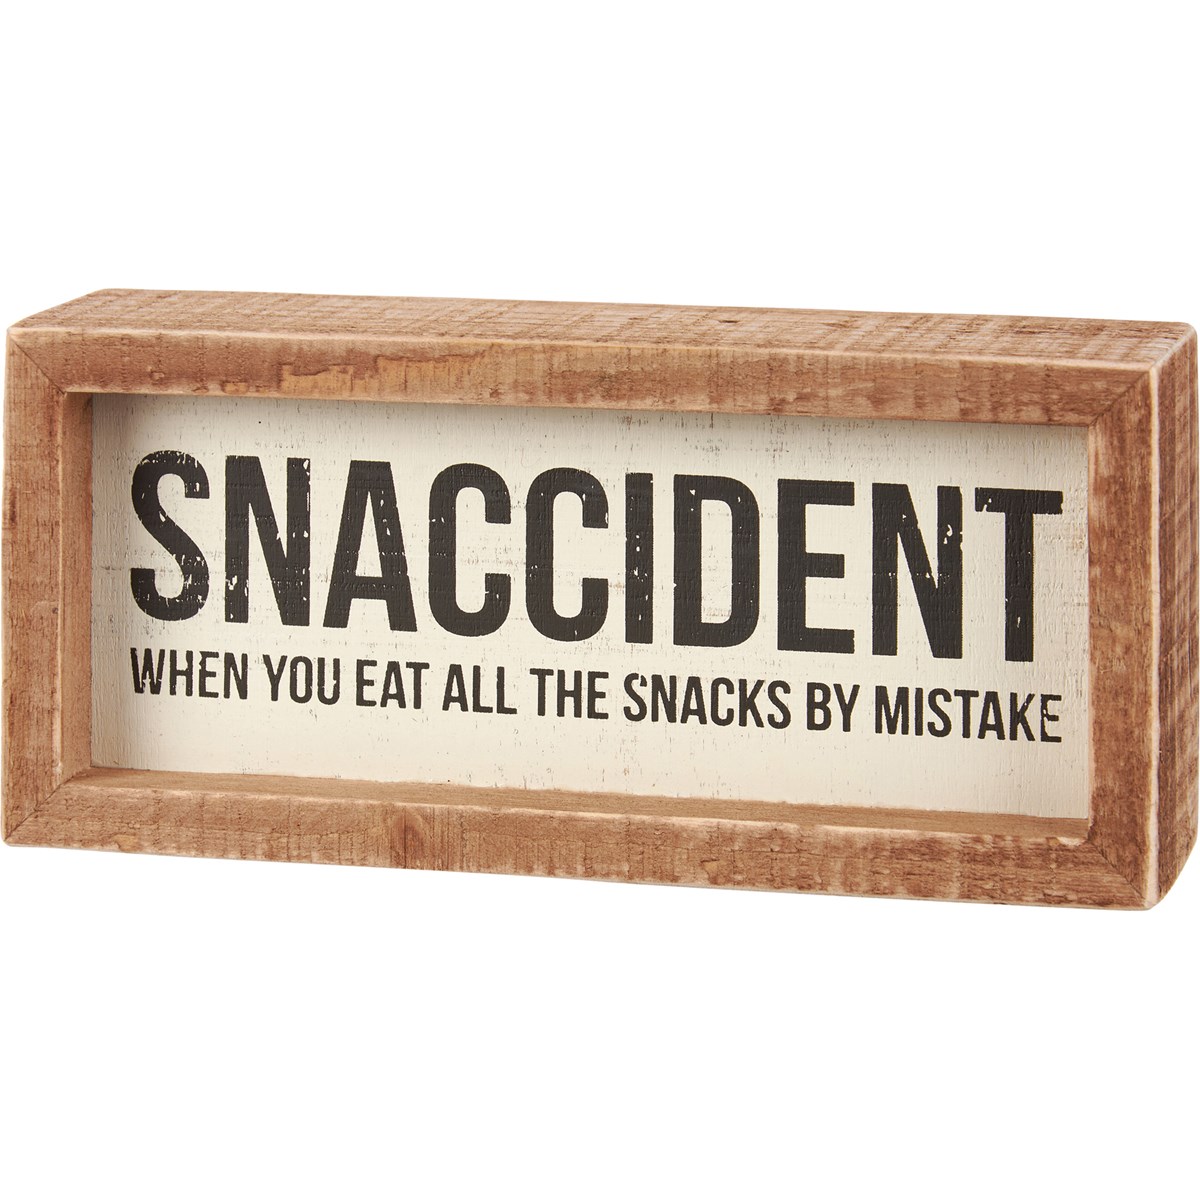 Snaccident Inset Box Sign - Wood